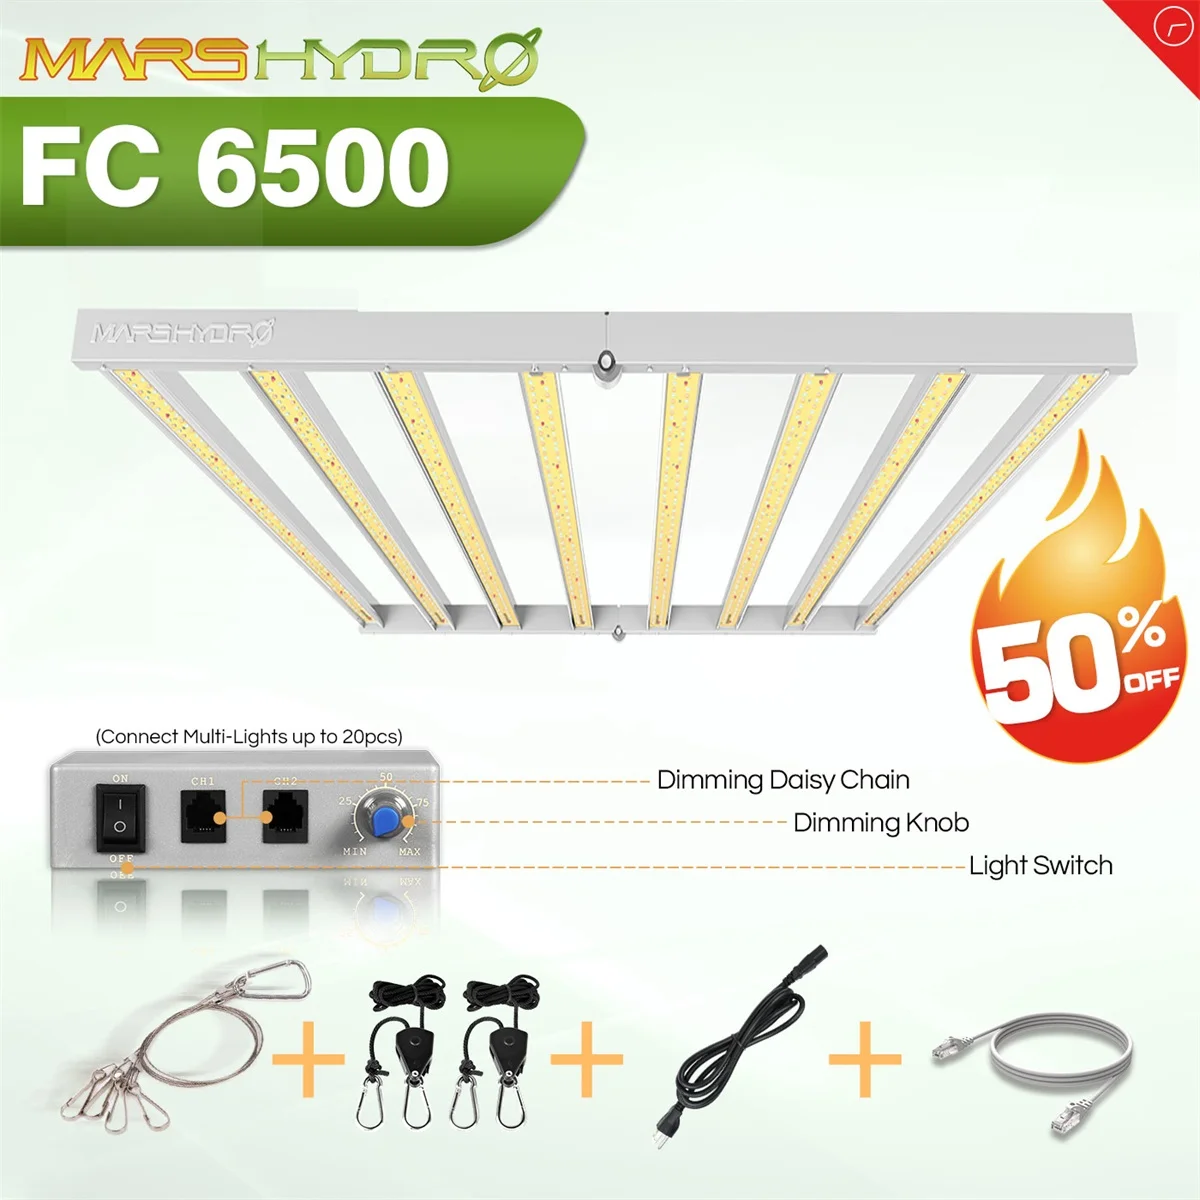 Mars Hydro FC 6500 Sunlike Led Grow Light Dimmable Full Spectrum Samsung LM301B Chips For Indoor Veg Flower Hydroponics Plants